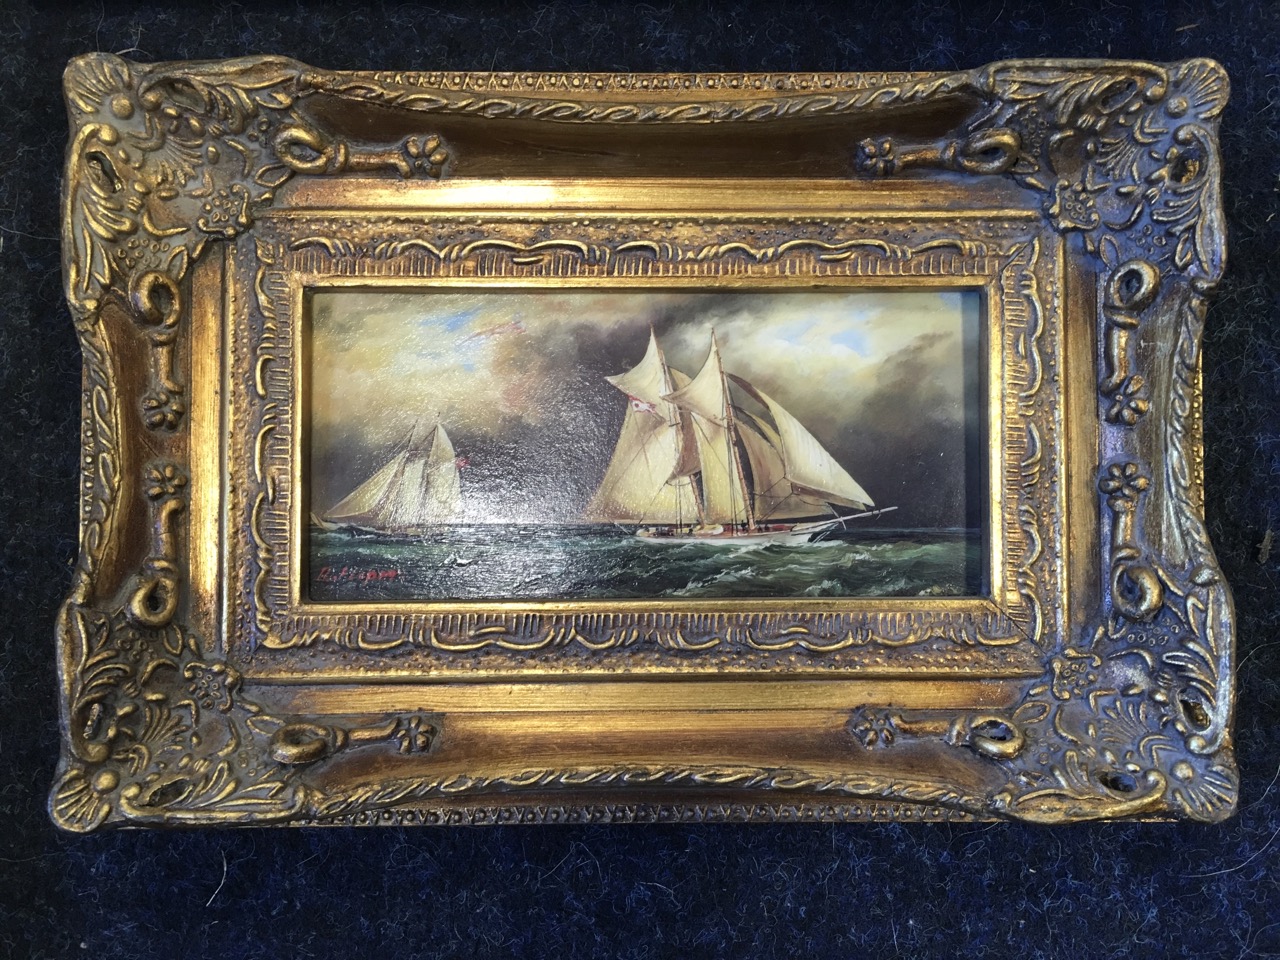 R Flaper, oil on card, two sailing yachts on choppy seas, signed and gilt framed; a pair of gilt - Image 4 of 6